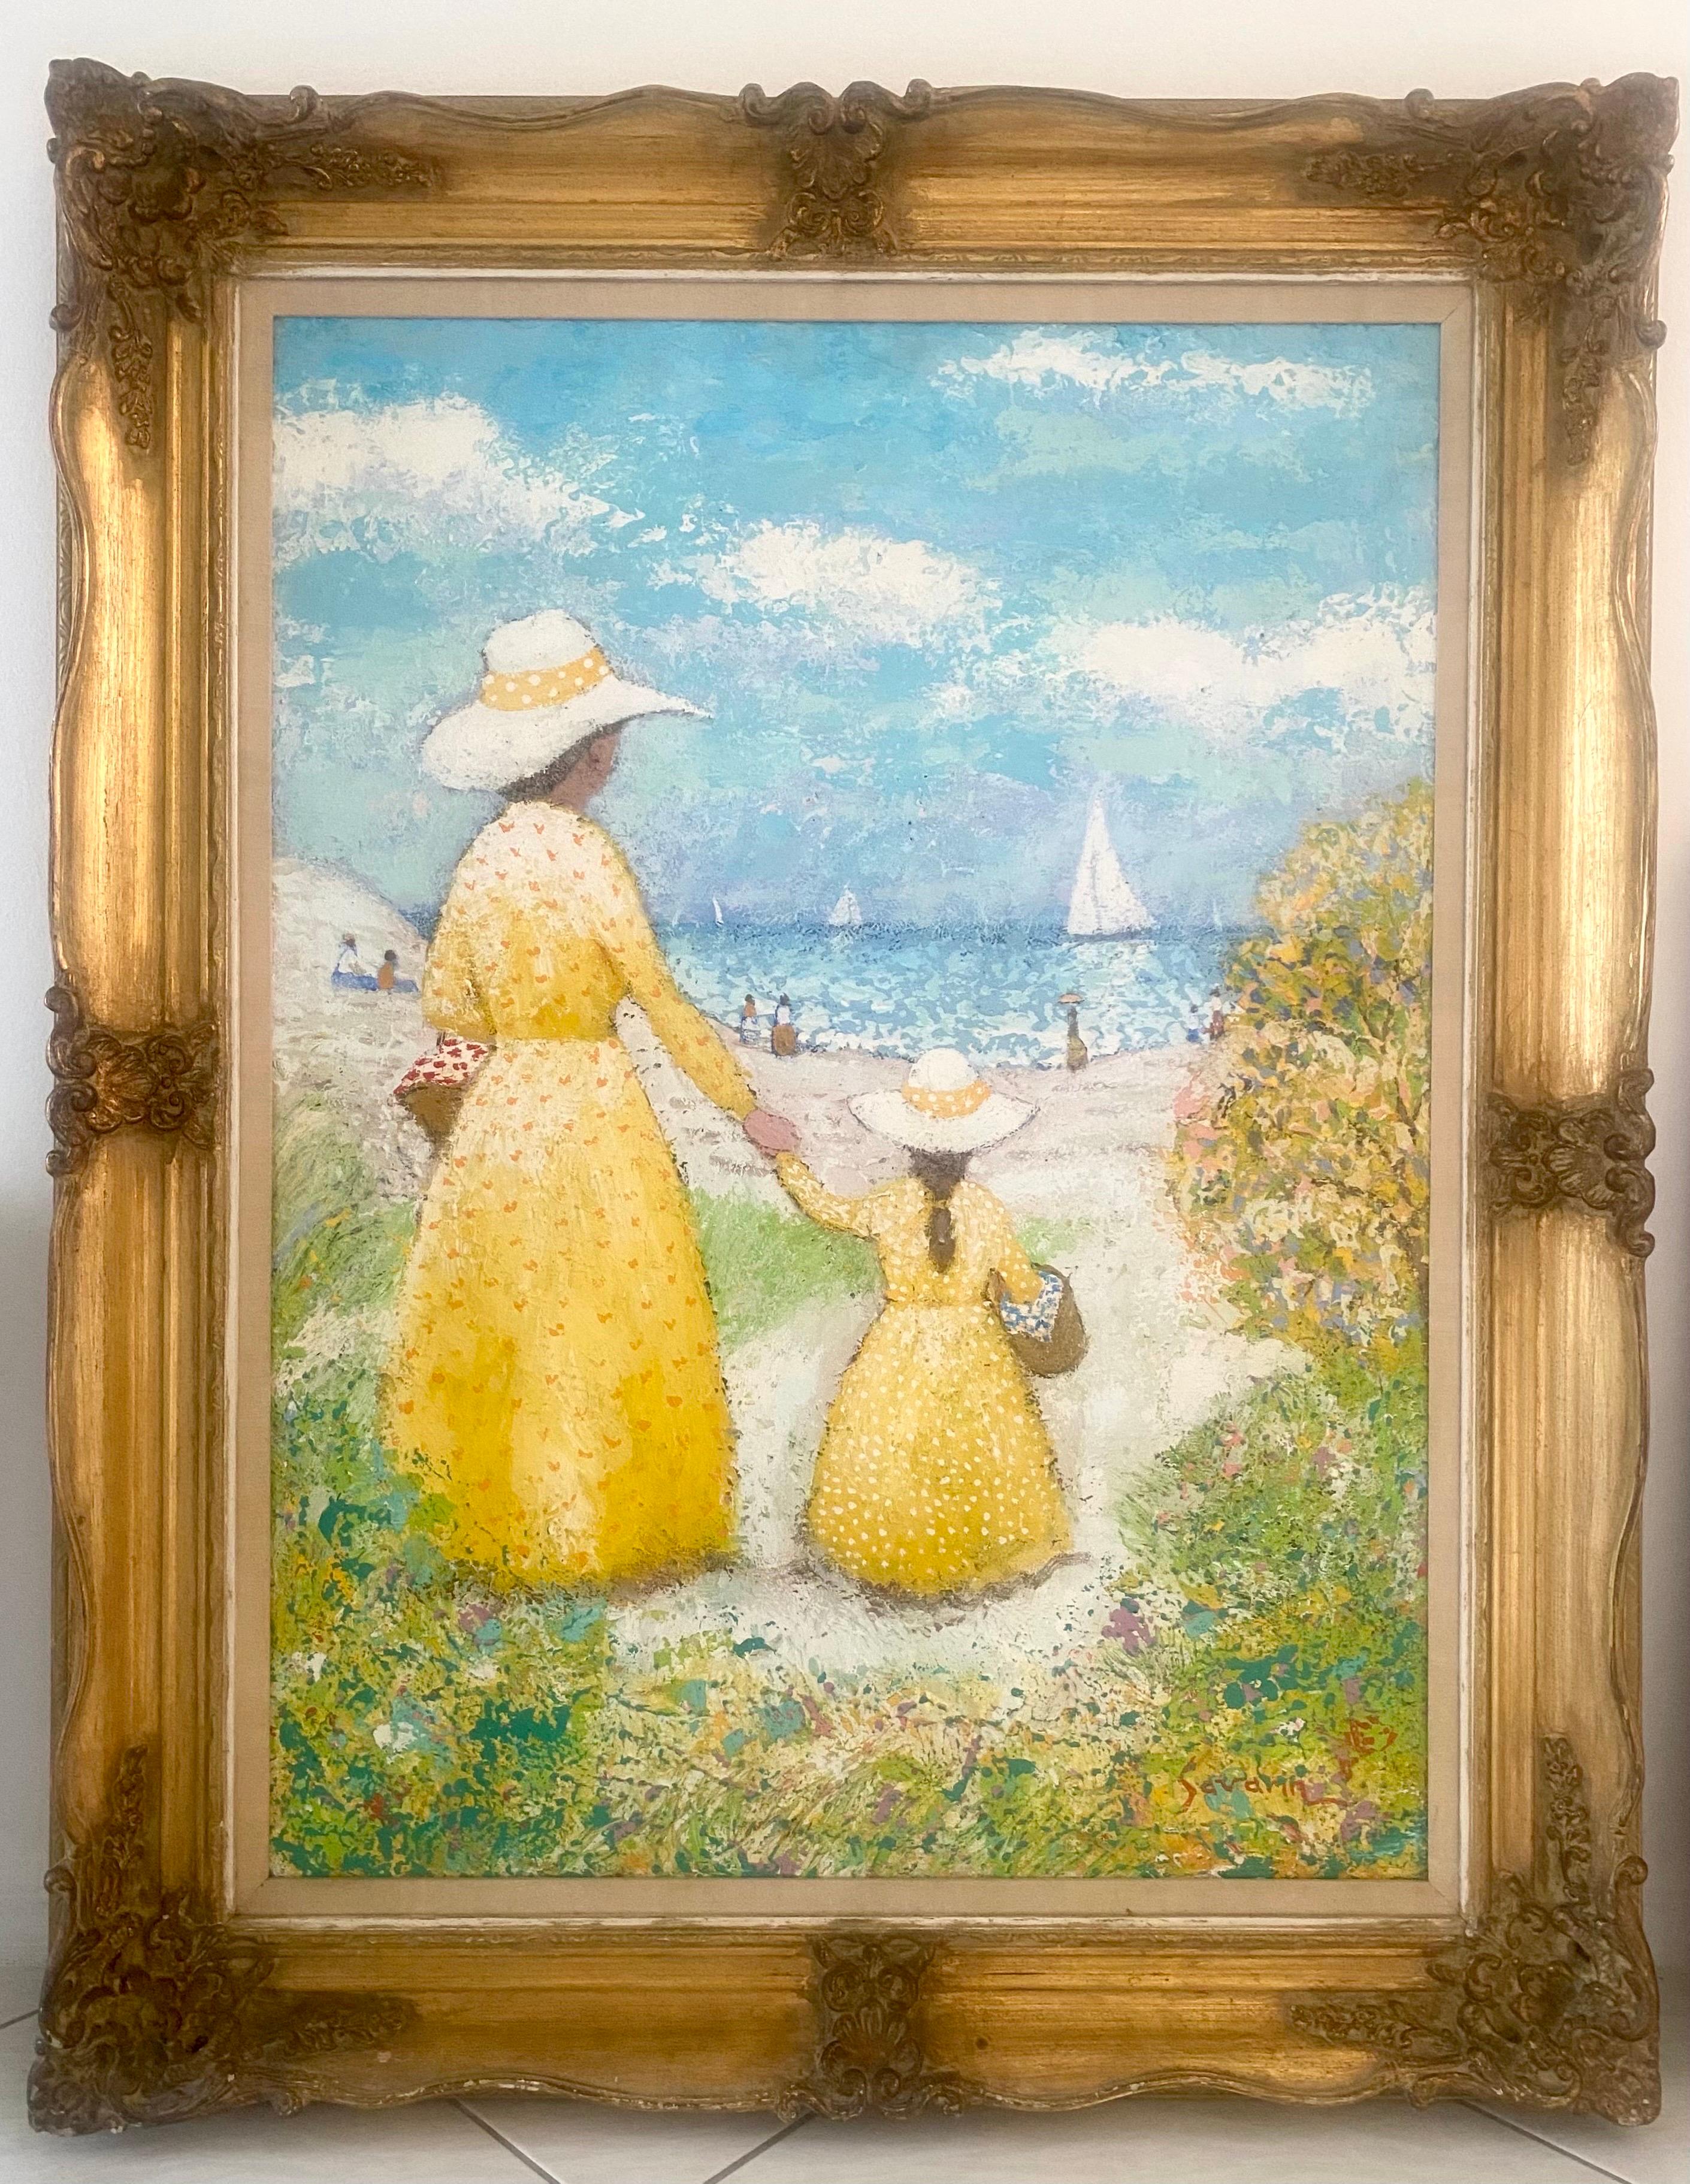 A stunning Impressionist oil on canvas painting of a lovely visit to the beach. A mother and daughter, clothed in matching yellow dresses and hats, stroll hand in hand, while holding picnic baskets, along a path of gorgeous wild flowers towards the